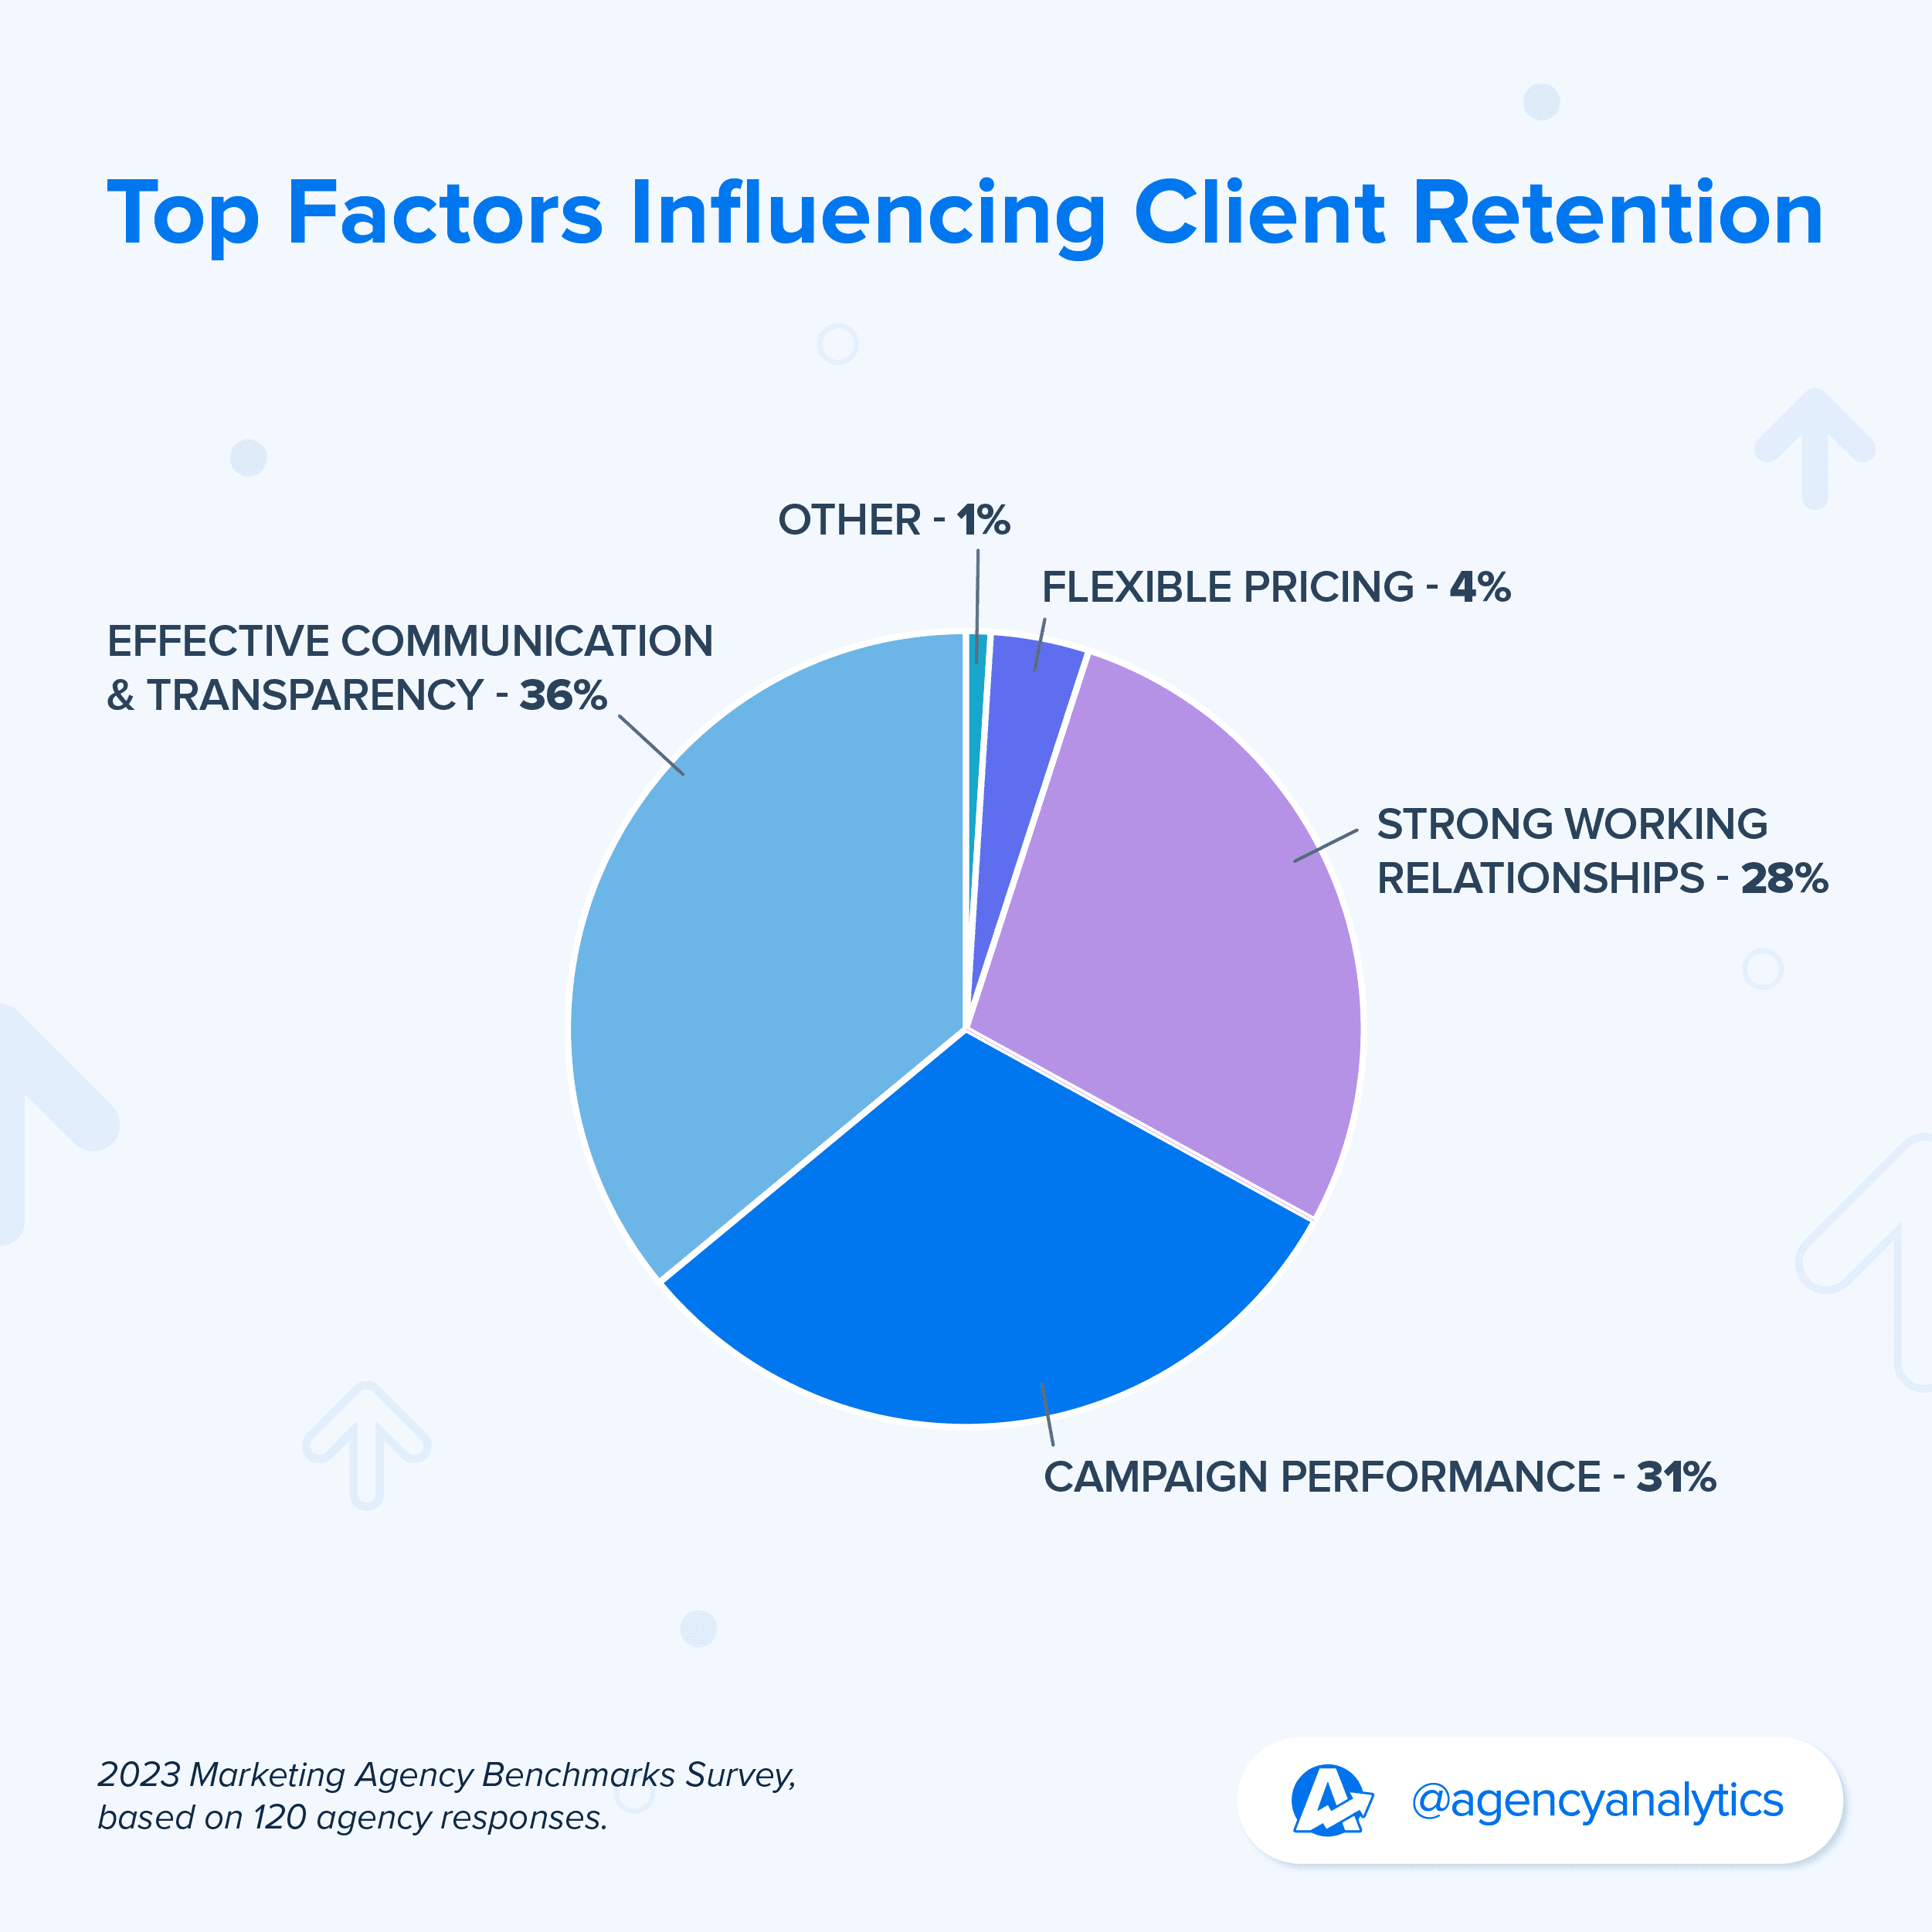 pie chart showing the top factors for client retention in agencies